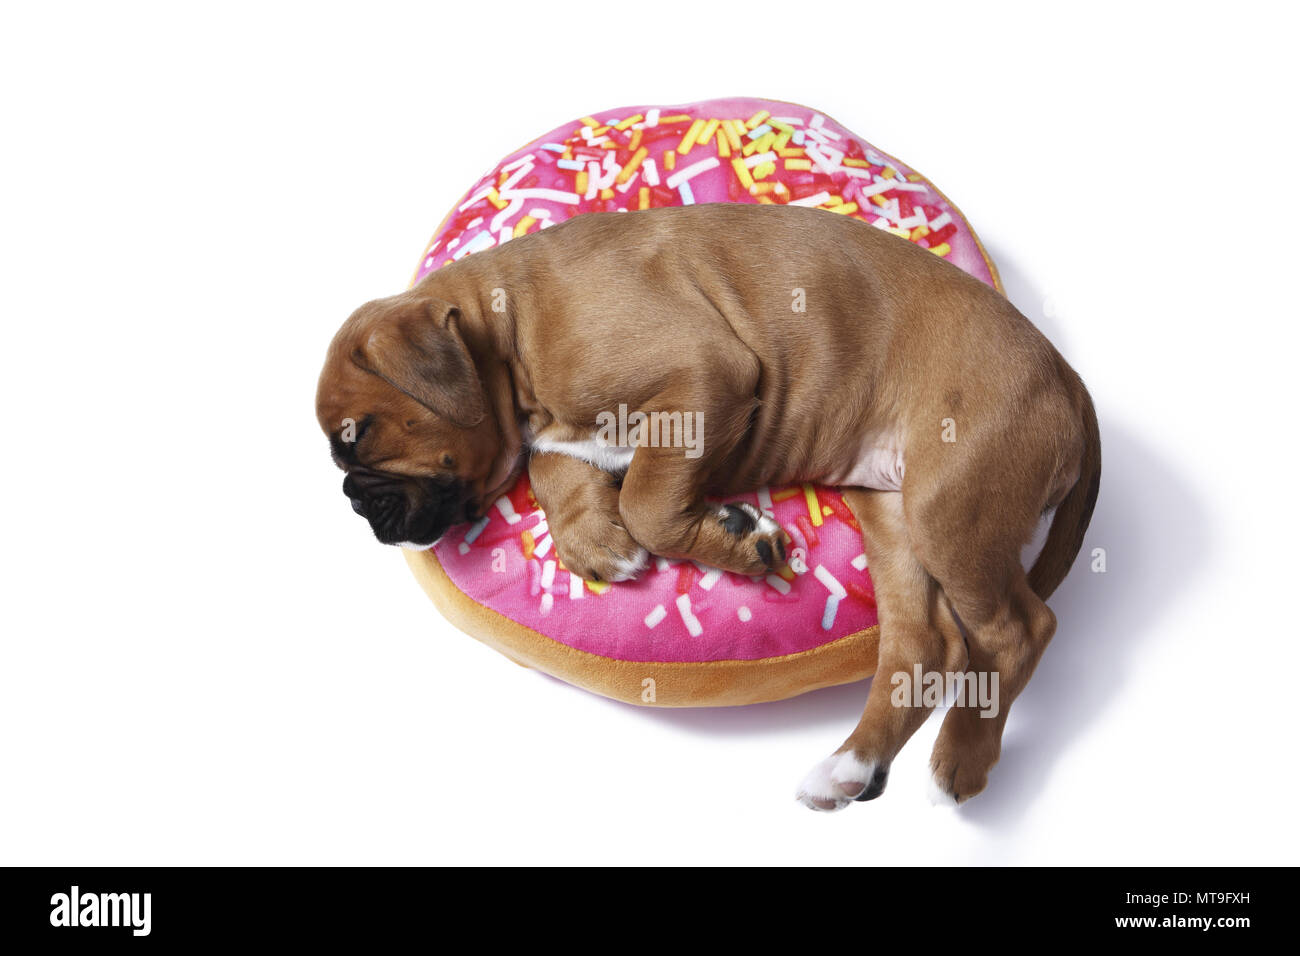 Animal sleeping Cut Out Stock Images & Pictures - Alamy